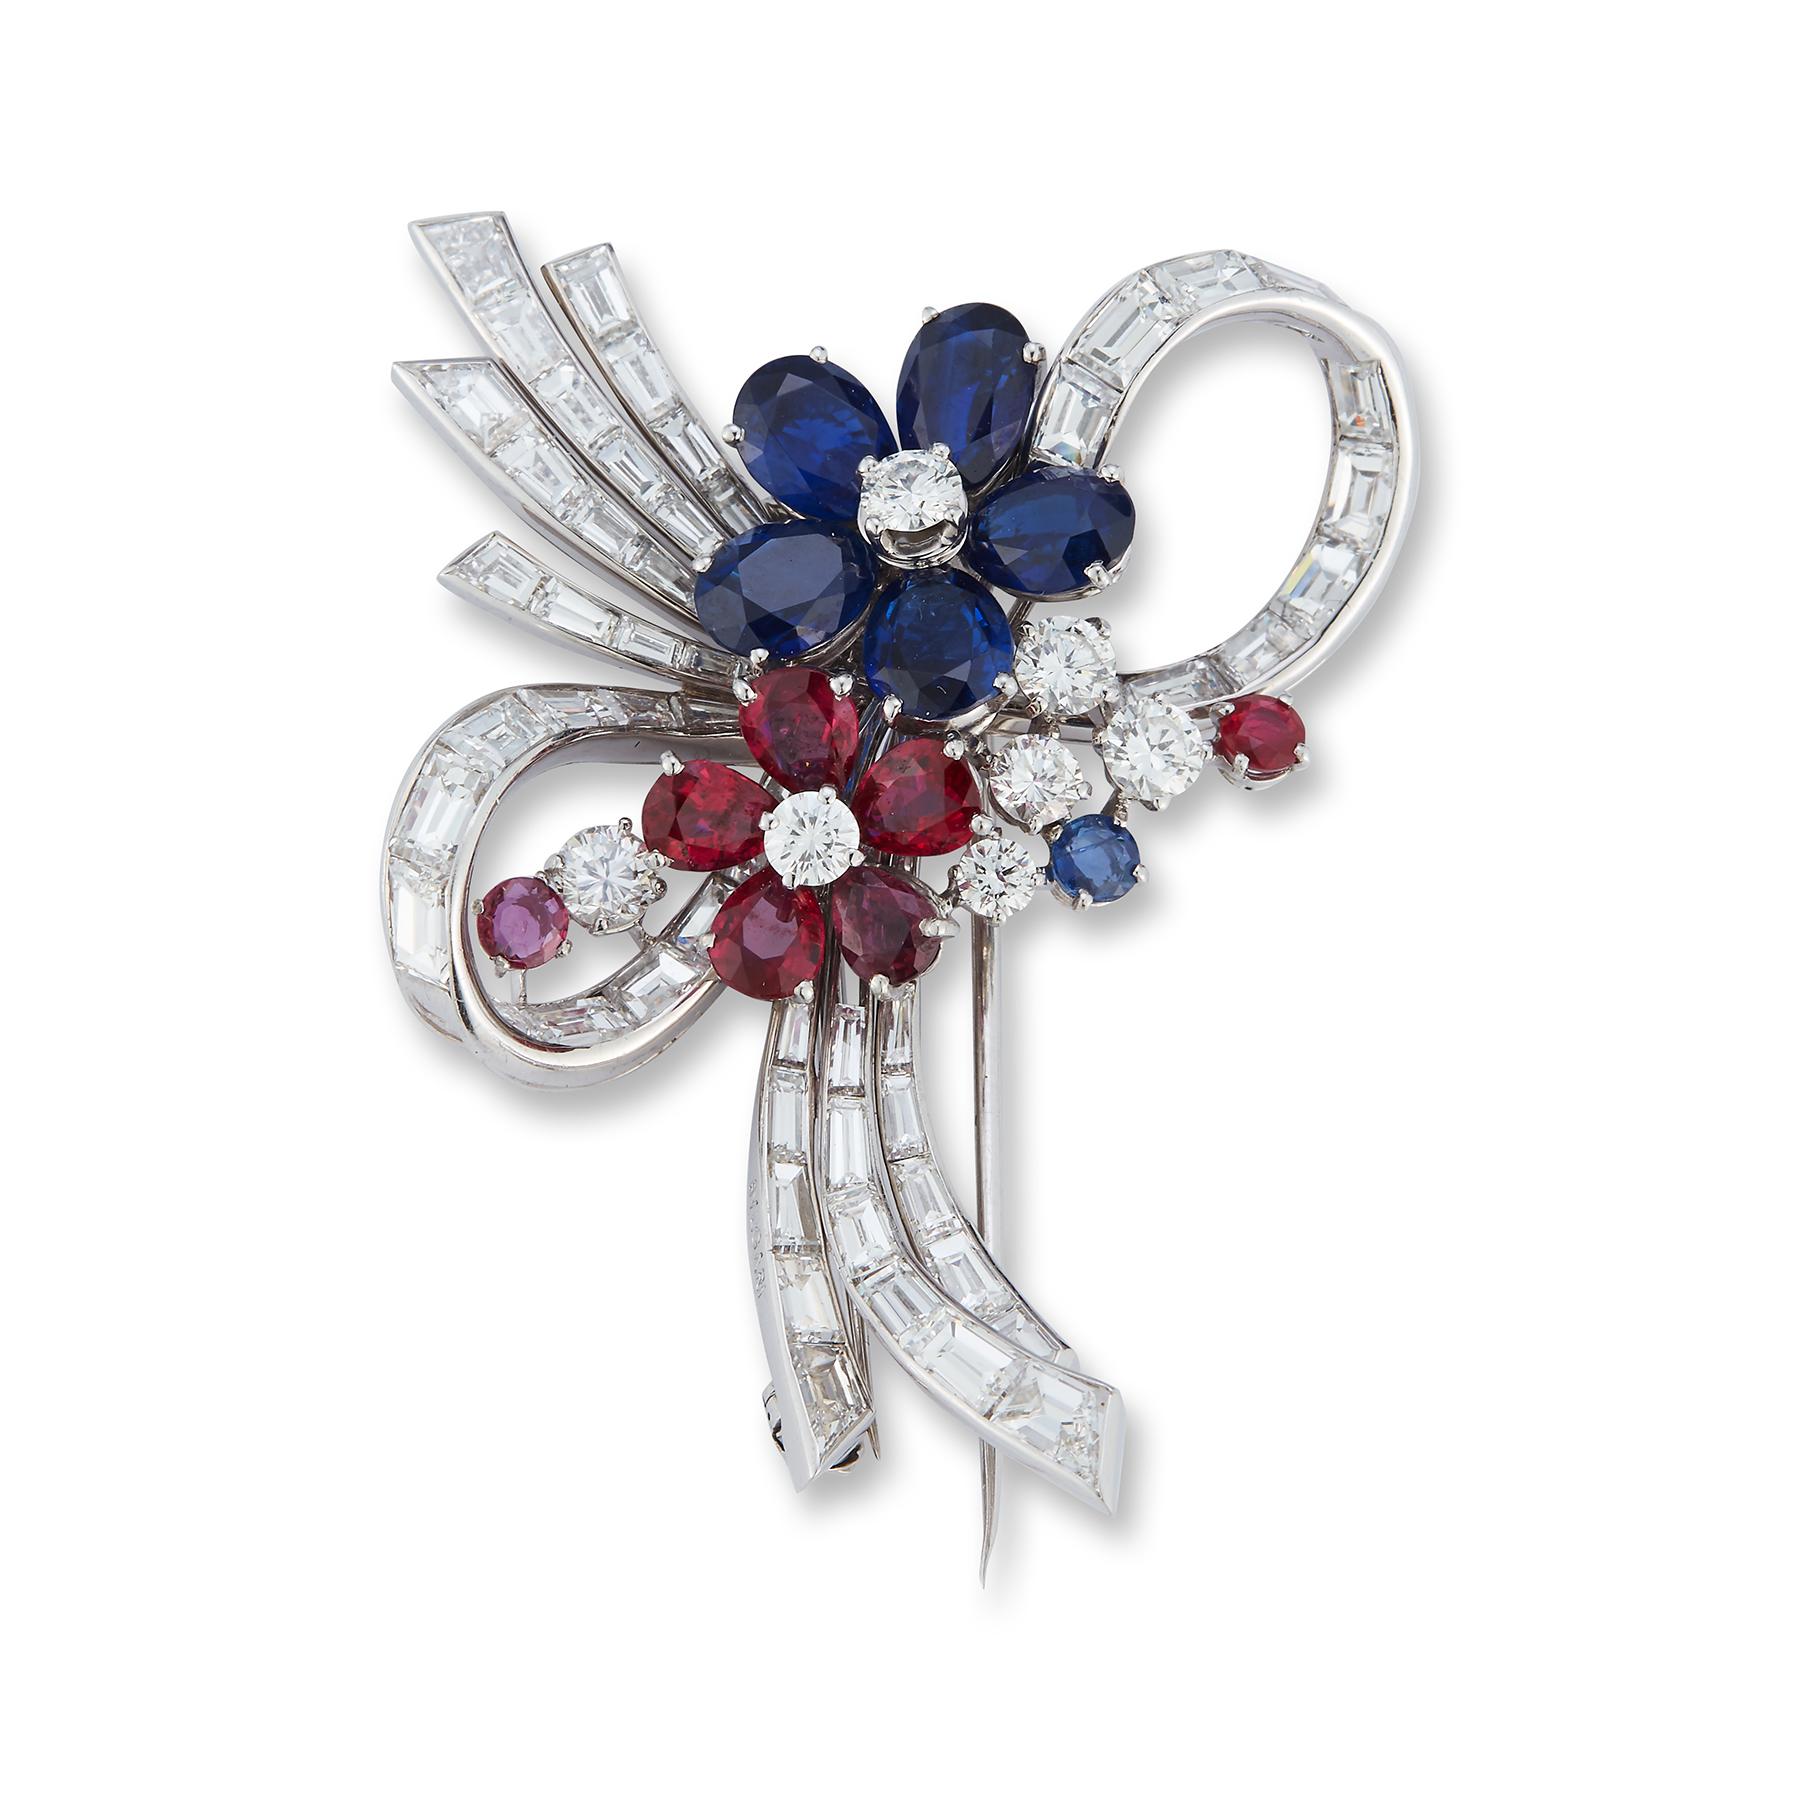 Bulgari Multi Gem & Diamond Floral Brooch set with oval-shaped sapphire and pear-shaped ruby petals with brilliant-cut diamonds.  Round cut ruby and sapphire side stones including a baguette-cut diamond stem and ribbon. Set  in 18K gold and